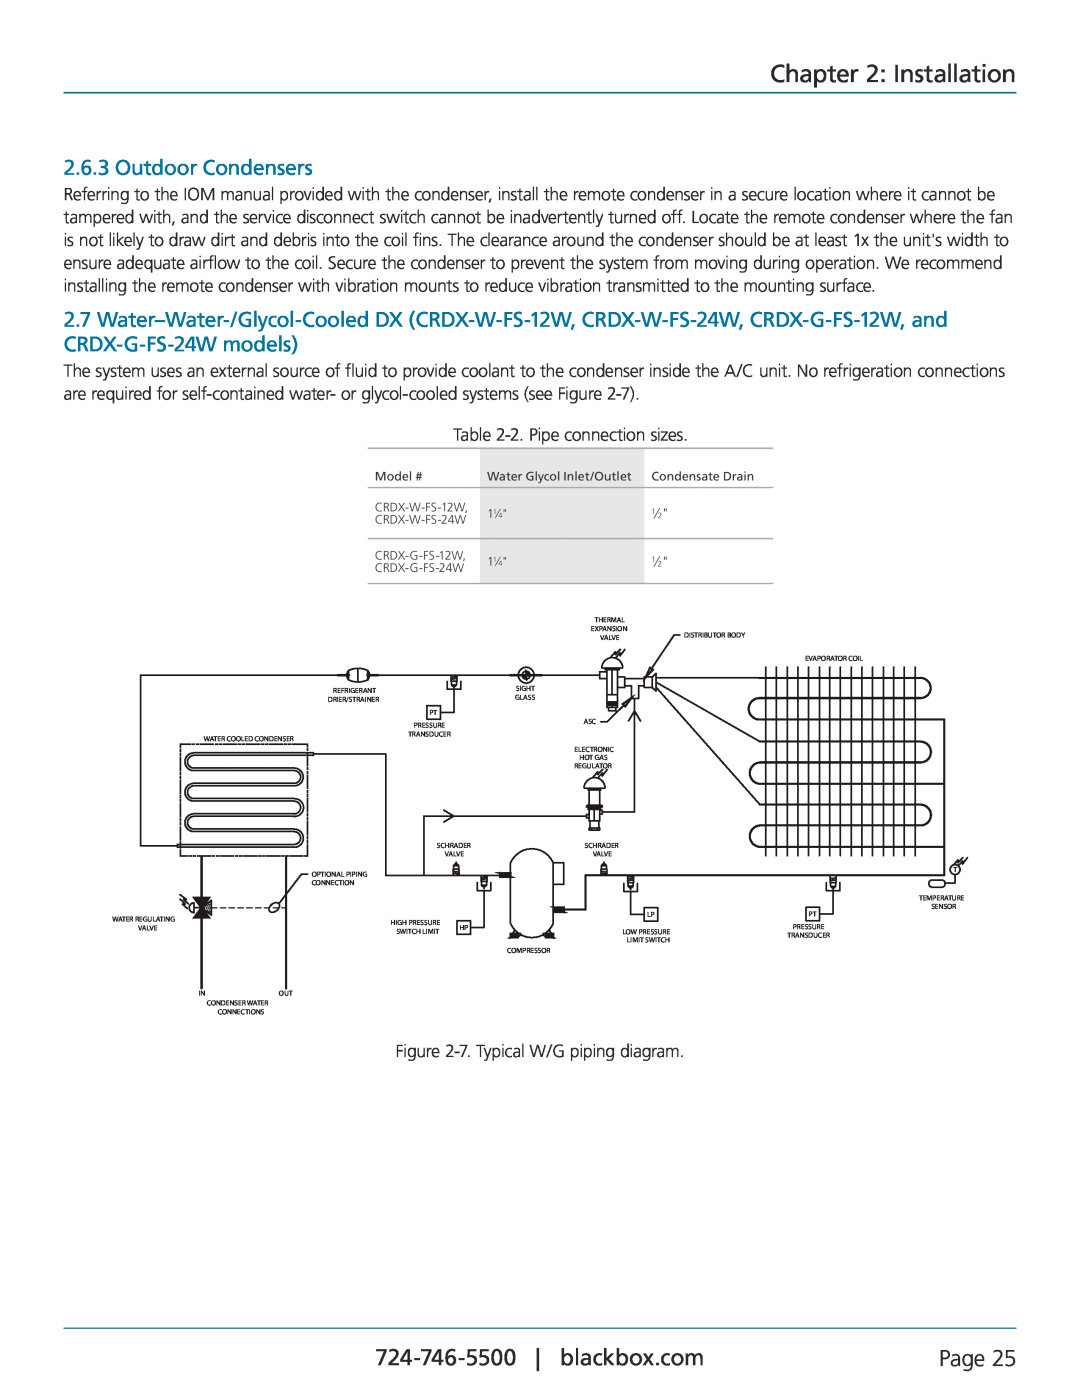 Black Box CRDX-G-FS-12KW Outdoor Condensers, Installation, Page, 2. Pipe connection sizes, 7. Typical W/G piping diagram 